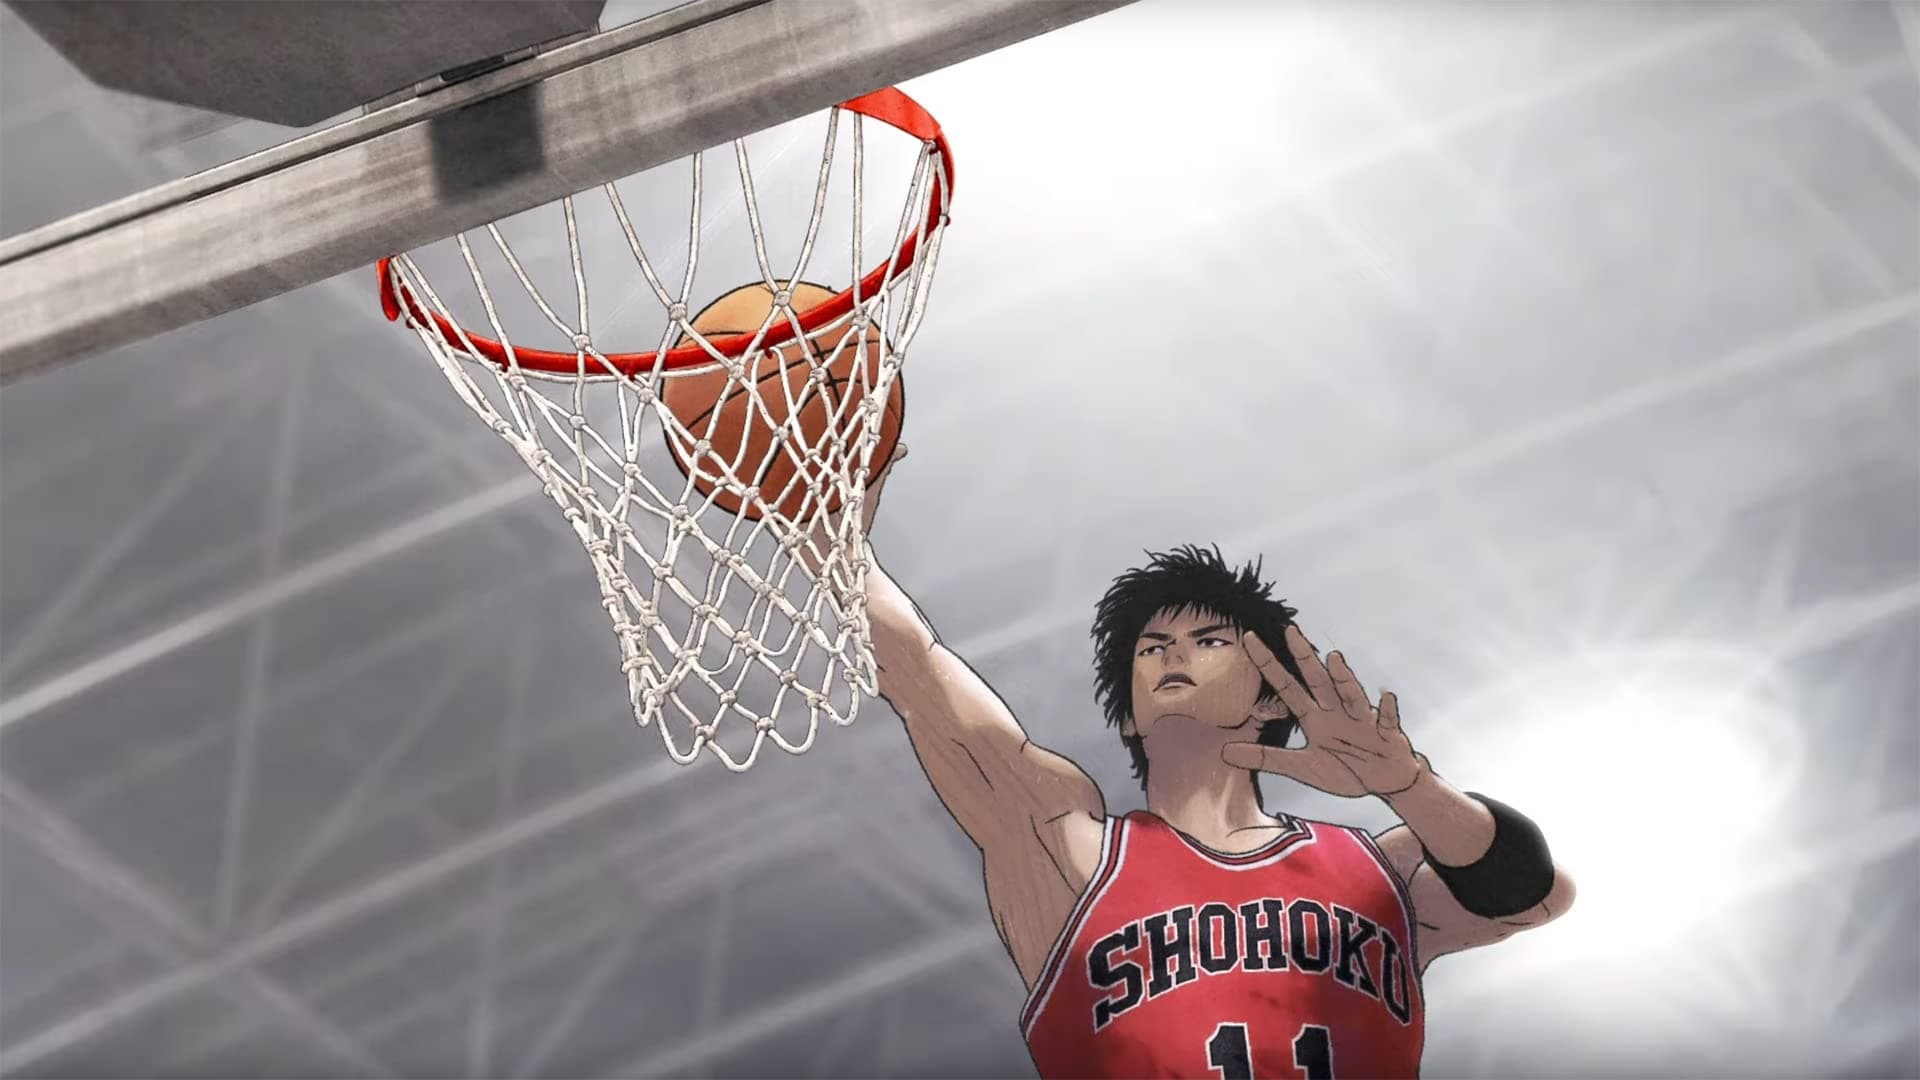 THE FIRST SLAM DUNK (2022)